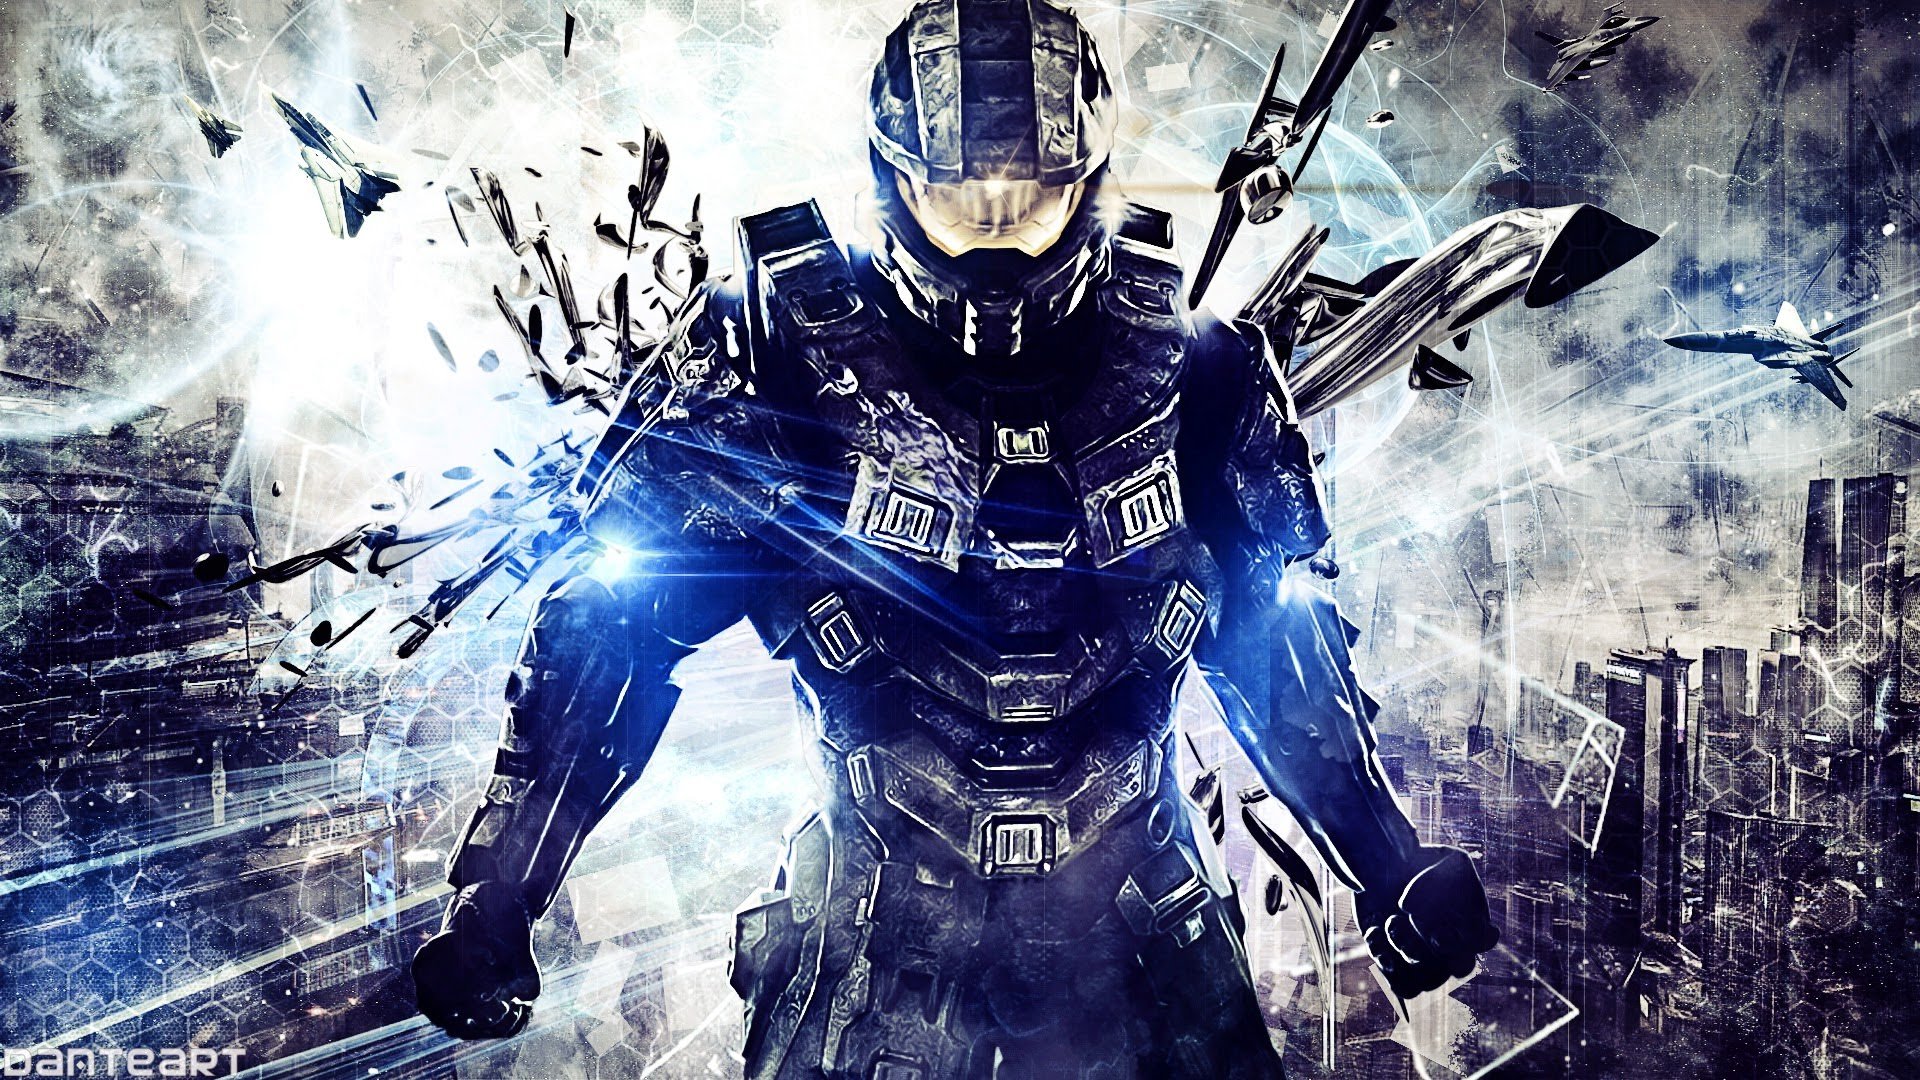 halo, Shooter, Fps, Action, Sci fi, Warrior, Futuristic, Tactical, Stealth, Armor Wallpaper